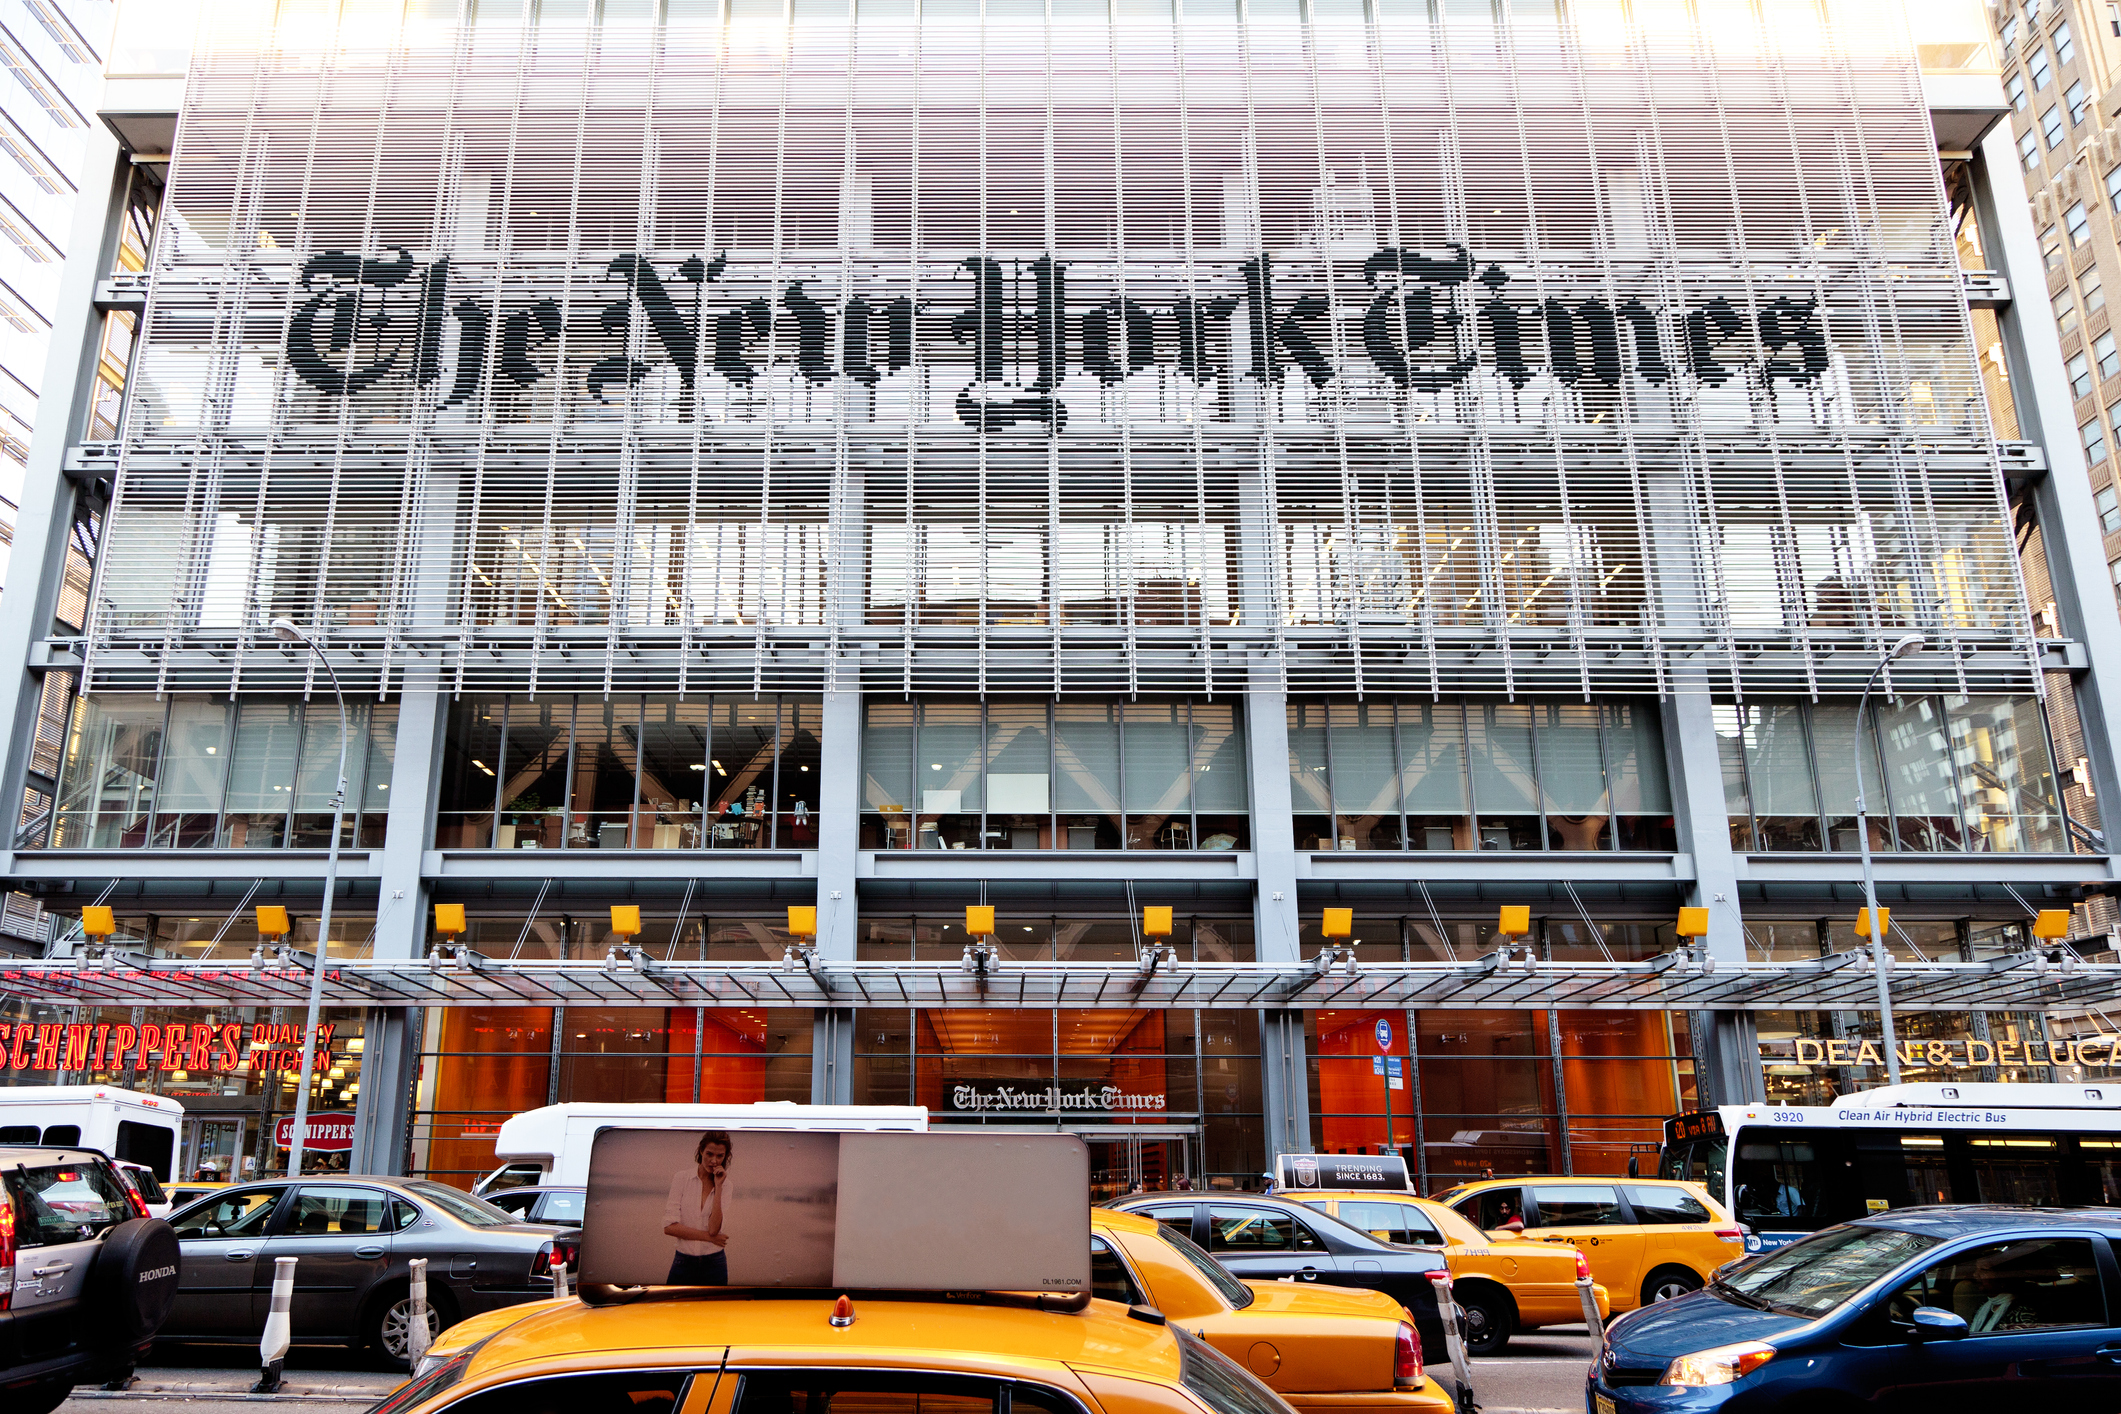 New York, USA - June 7, 2014: Facade of The New York Times headquarters building on 8th Ave. in Midtown Manhattan. Photo credit: mizoula